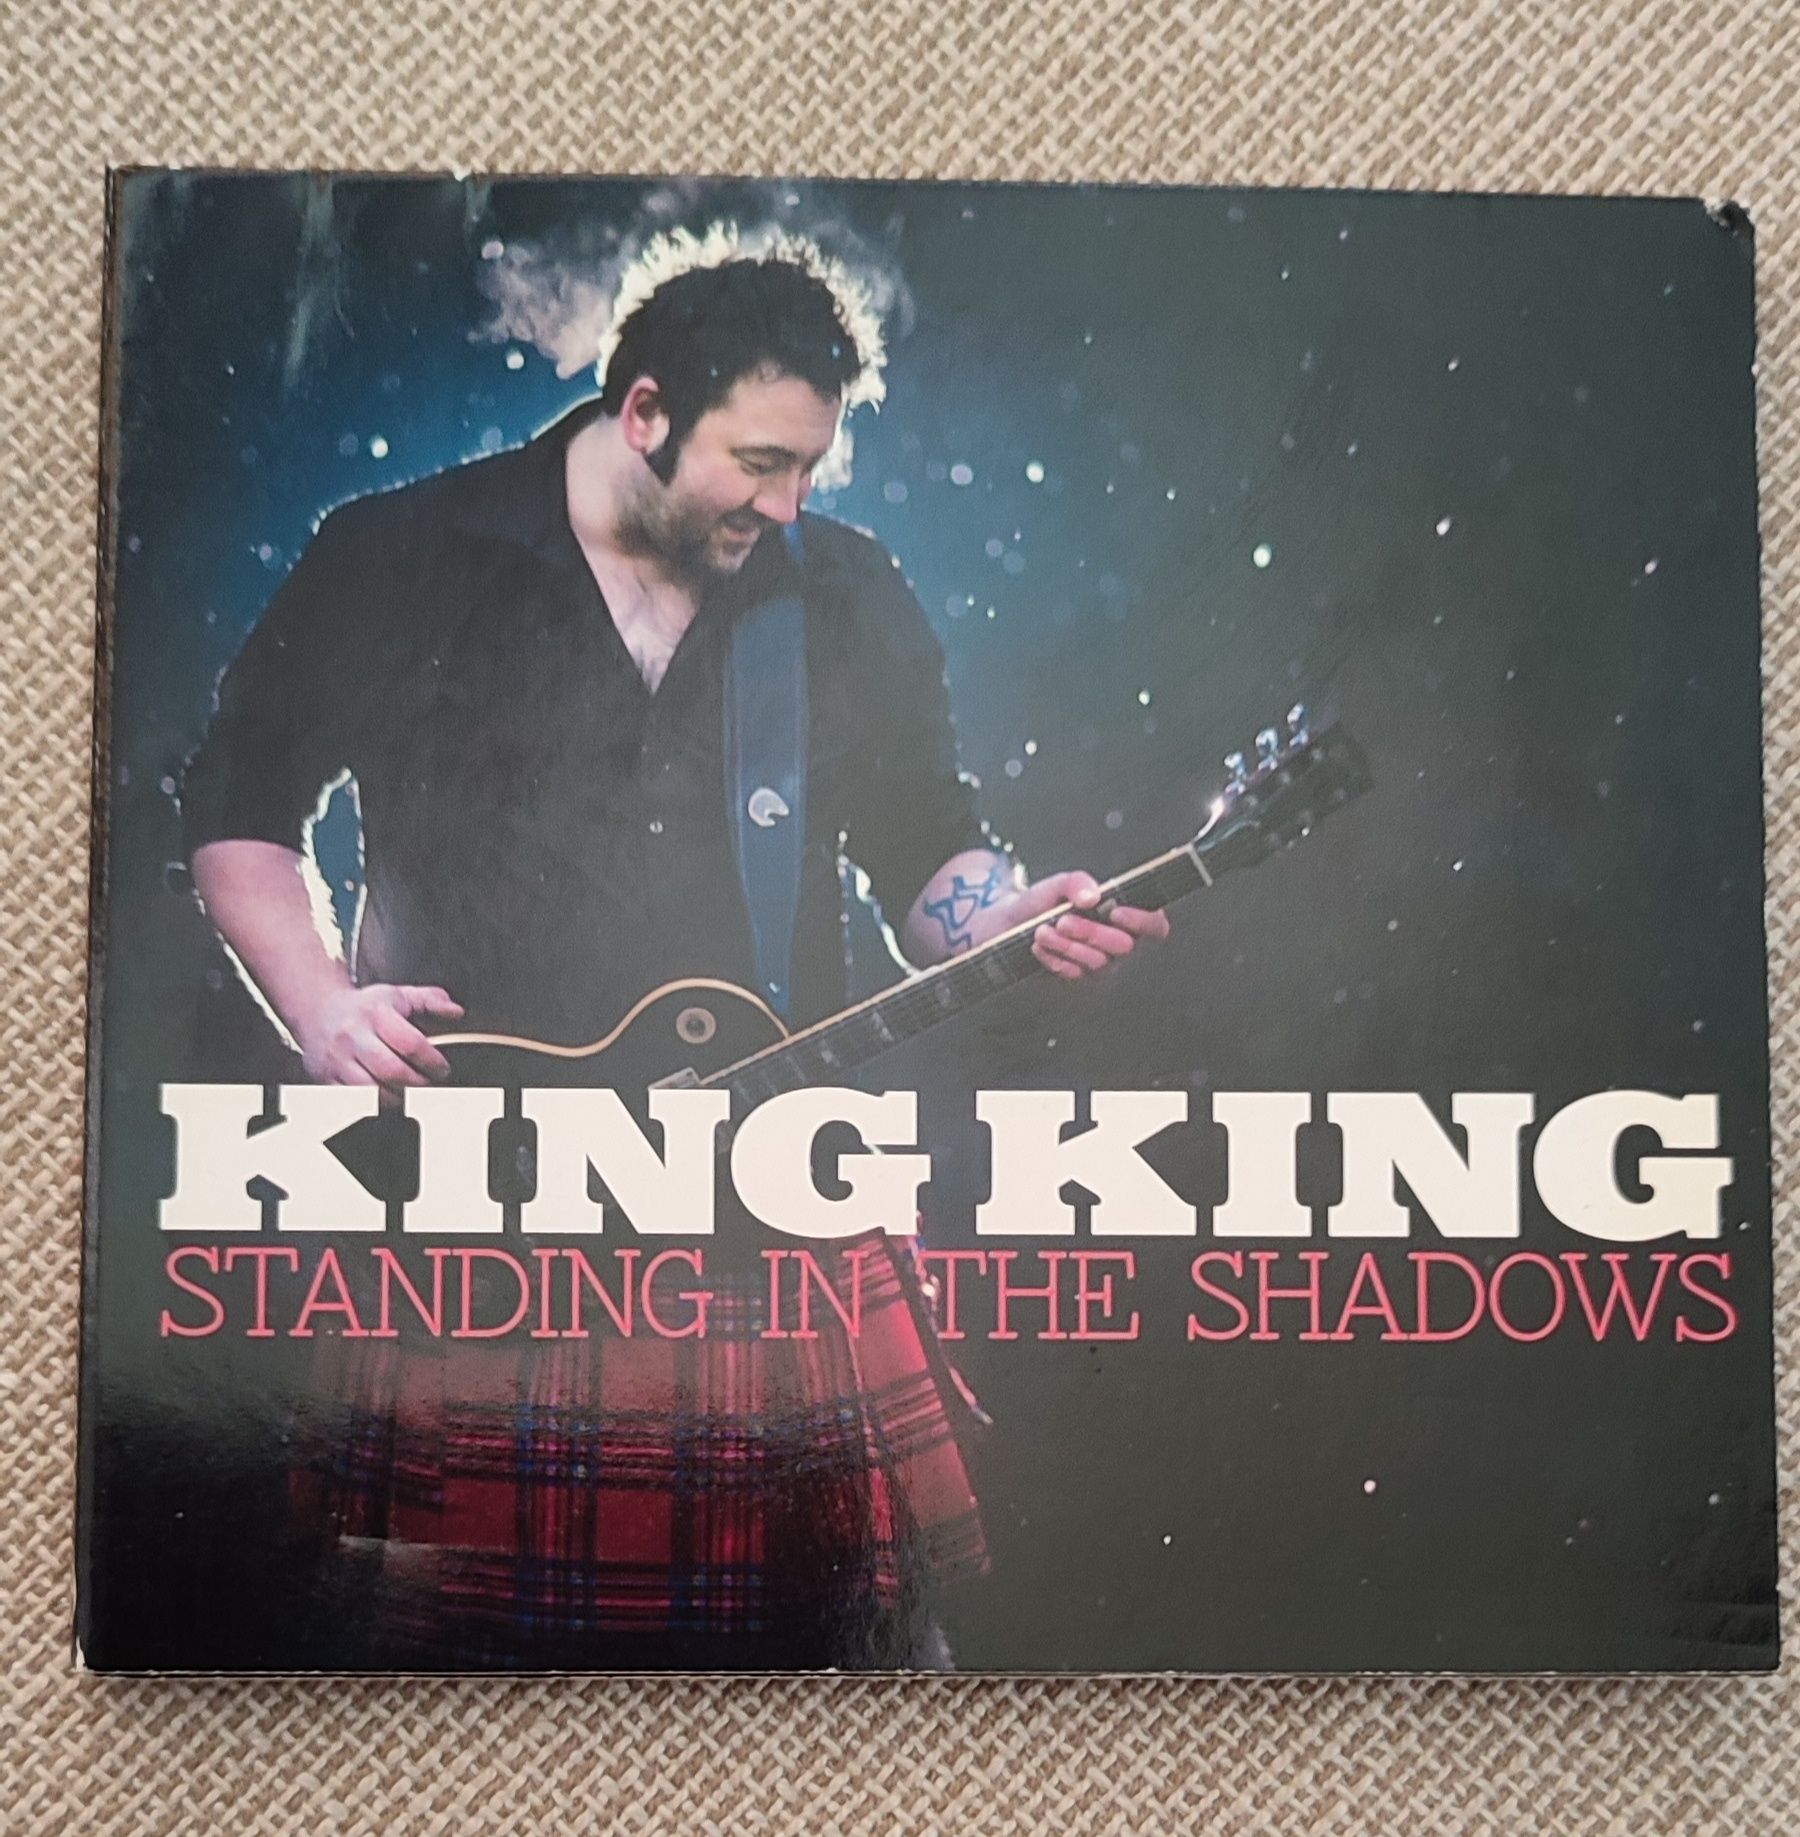 King King standing in the shadows CD